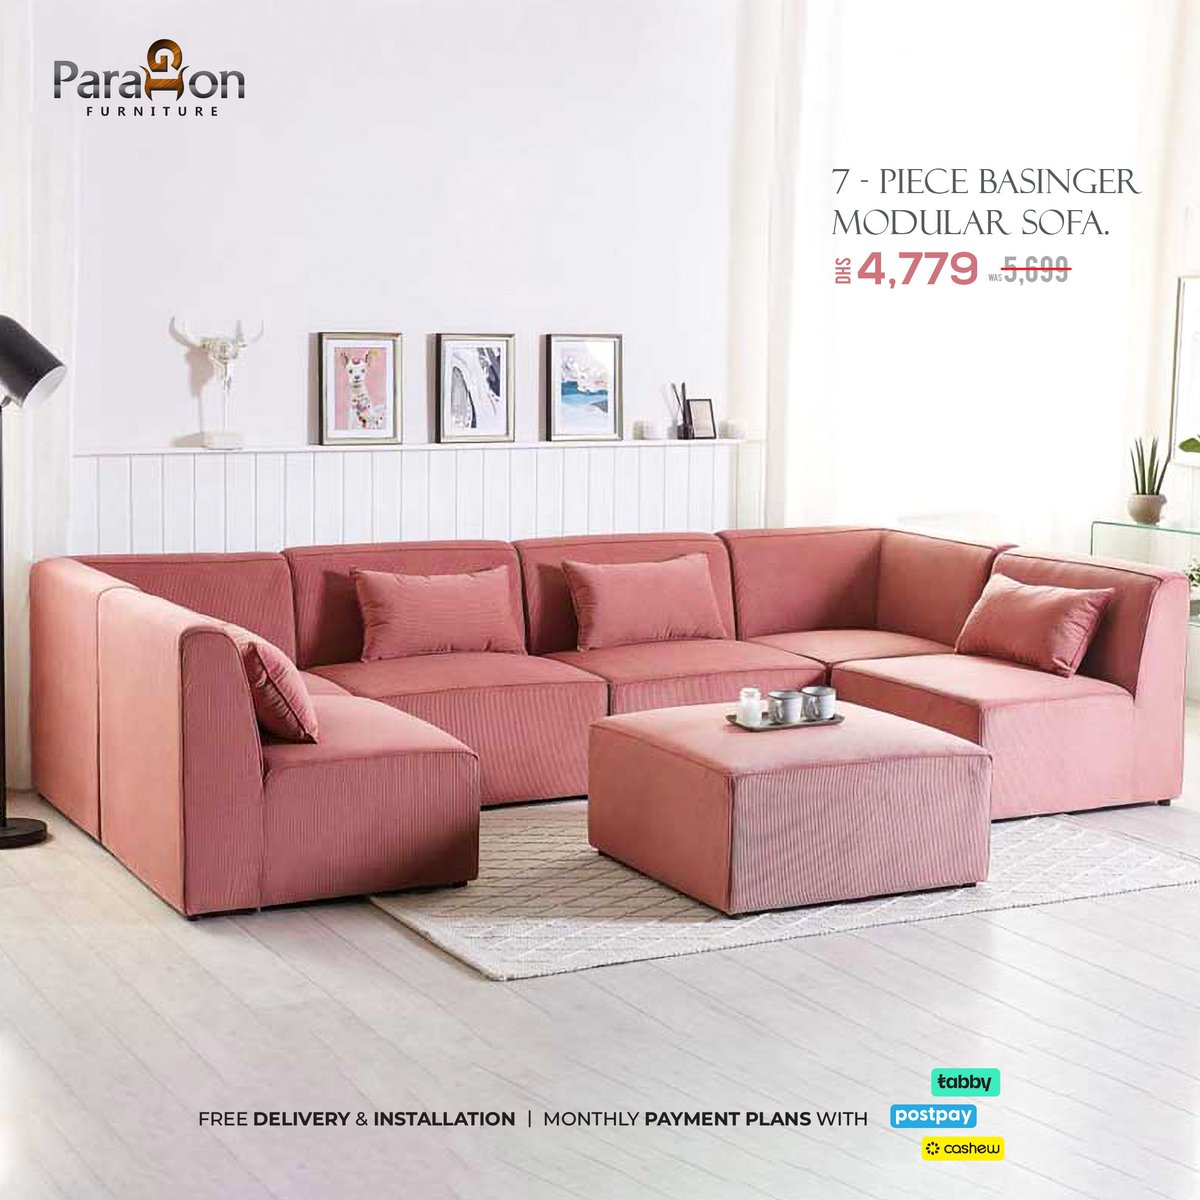 Elevate the style and organization of your living room with the modern Basinger Modular Sofa. paragonfurniture.ae 

#furniture #Trending  #luxuryfurniture #interiordesign #interiordesign #Dubai #dubailife #livingroomdecor #interiordecor #instagram #Trending #NewPost